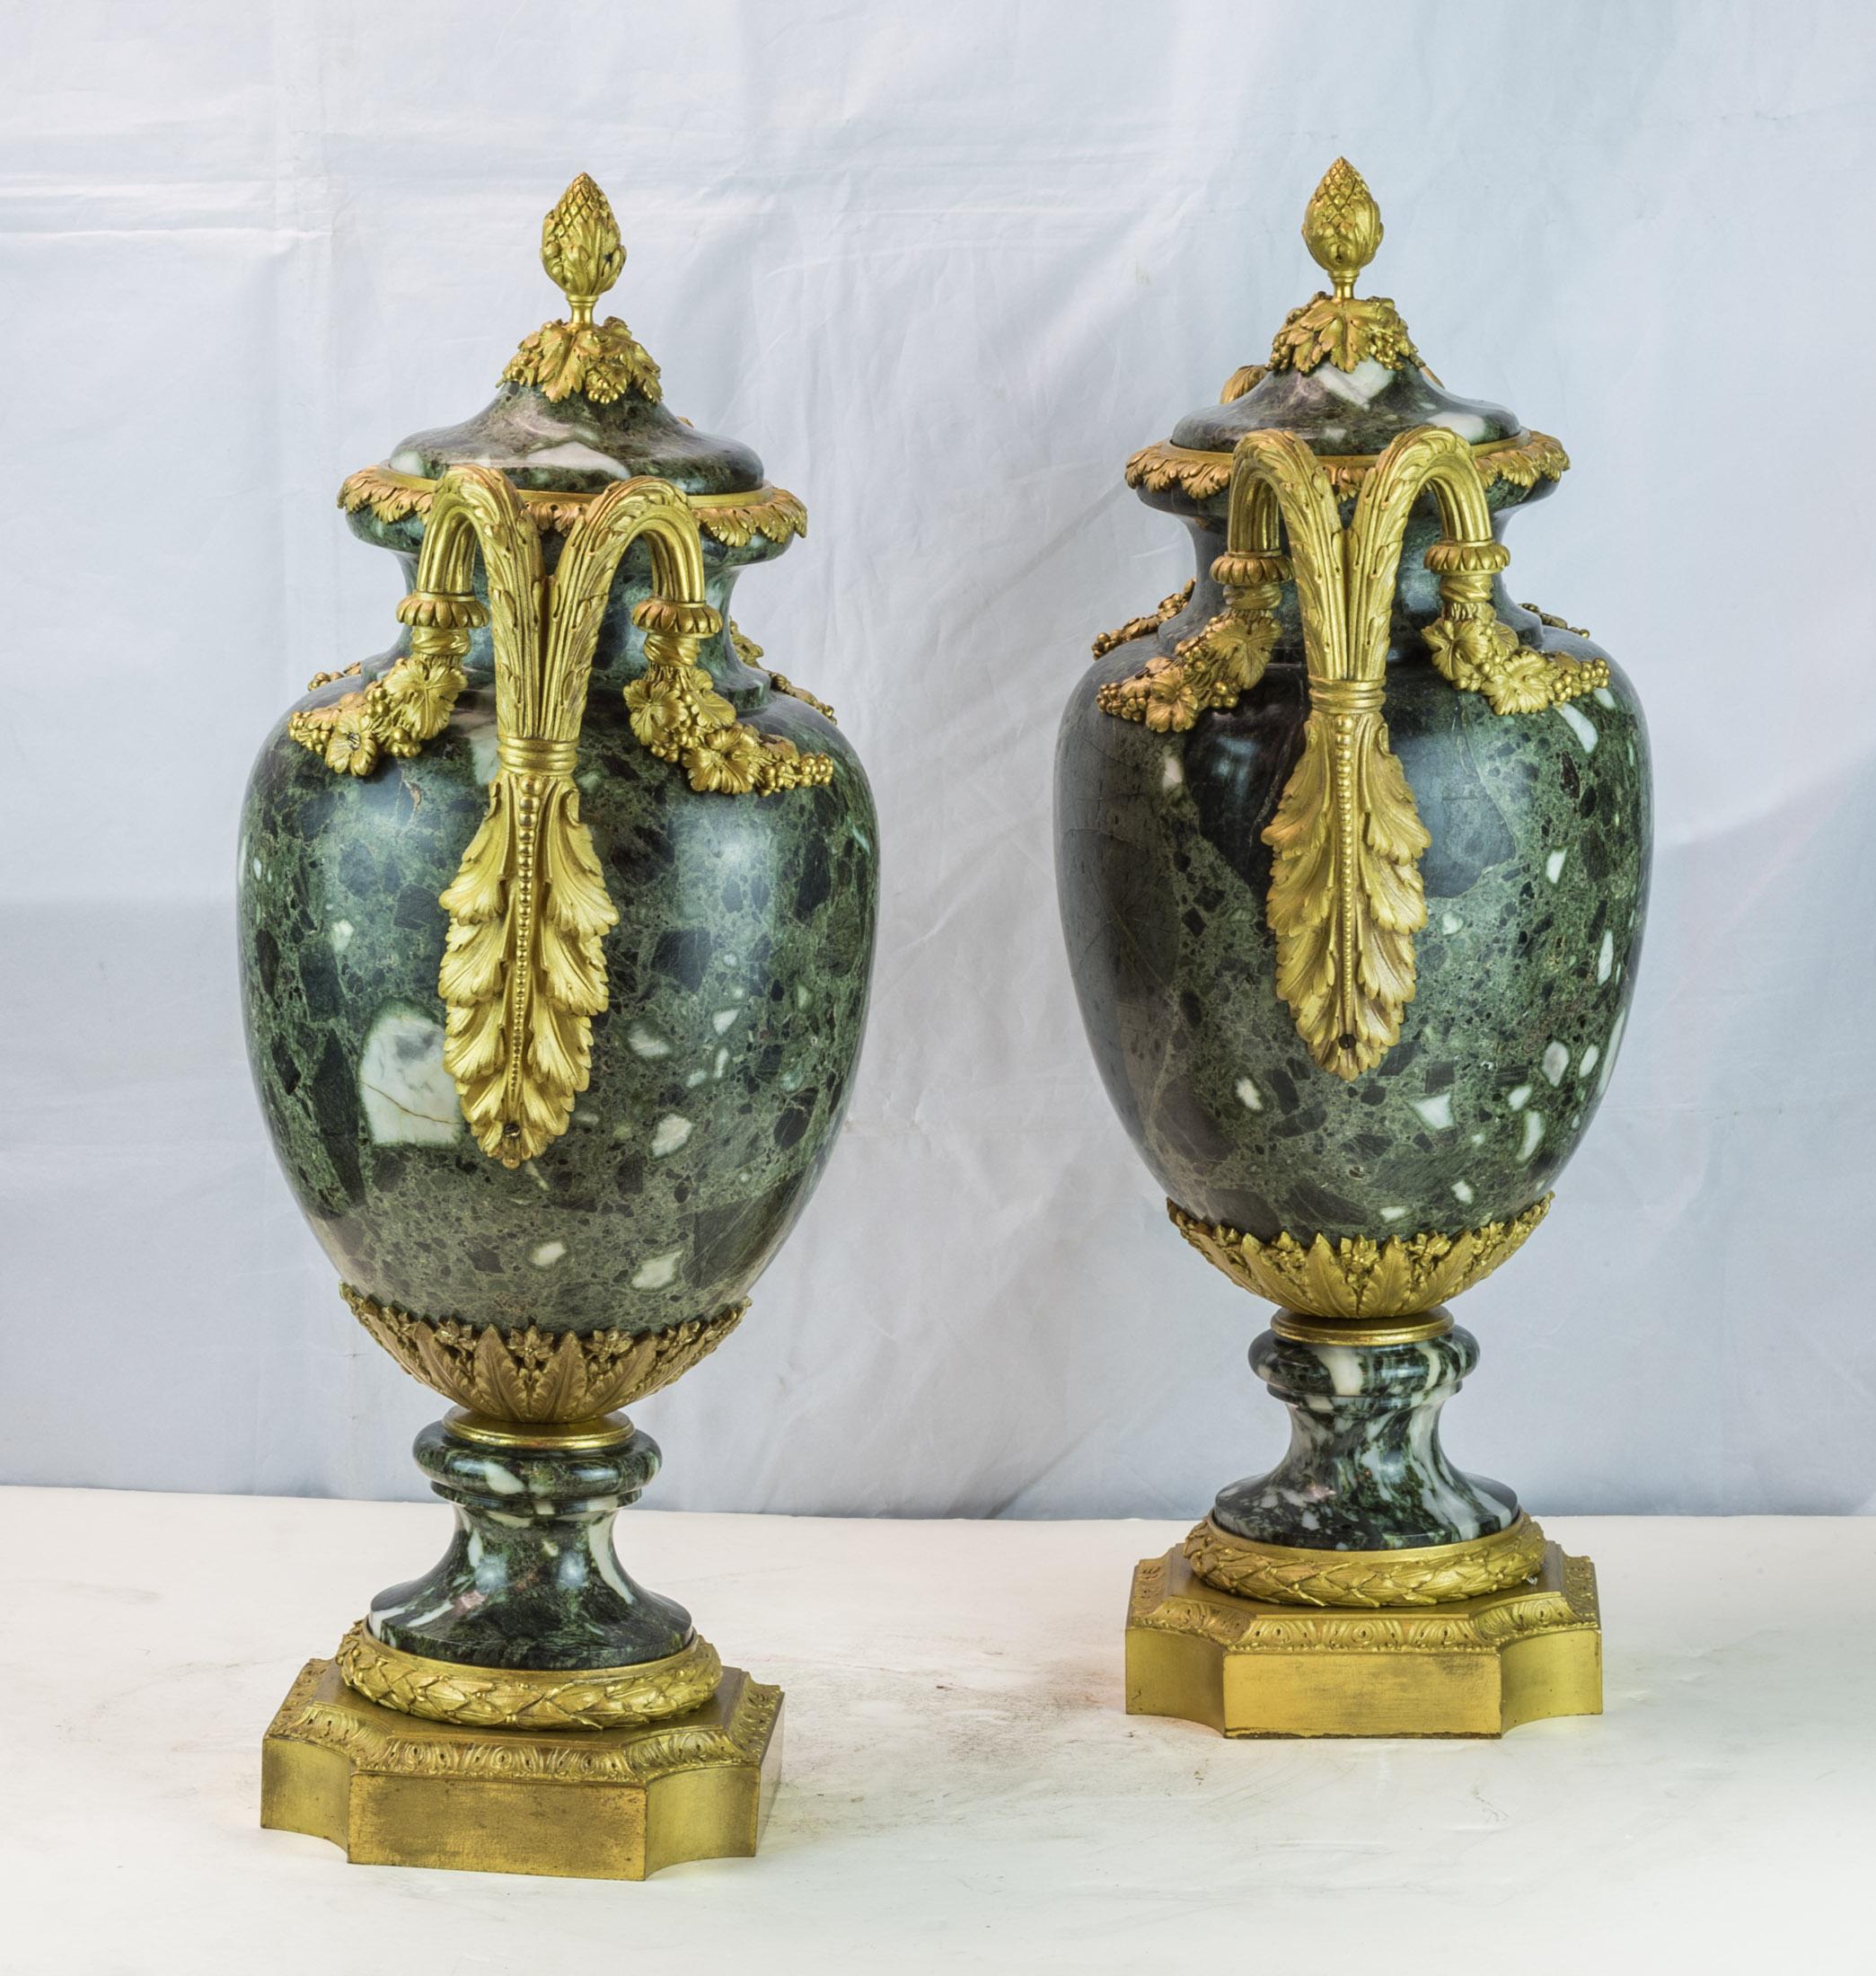 Baroque Important Pair of Louis XVI Style Ormolu-Mounted Green Marble Vases For Sale